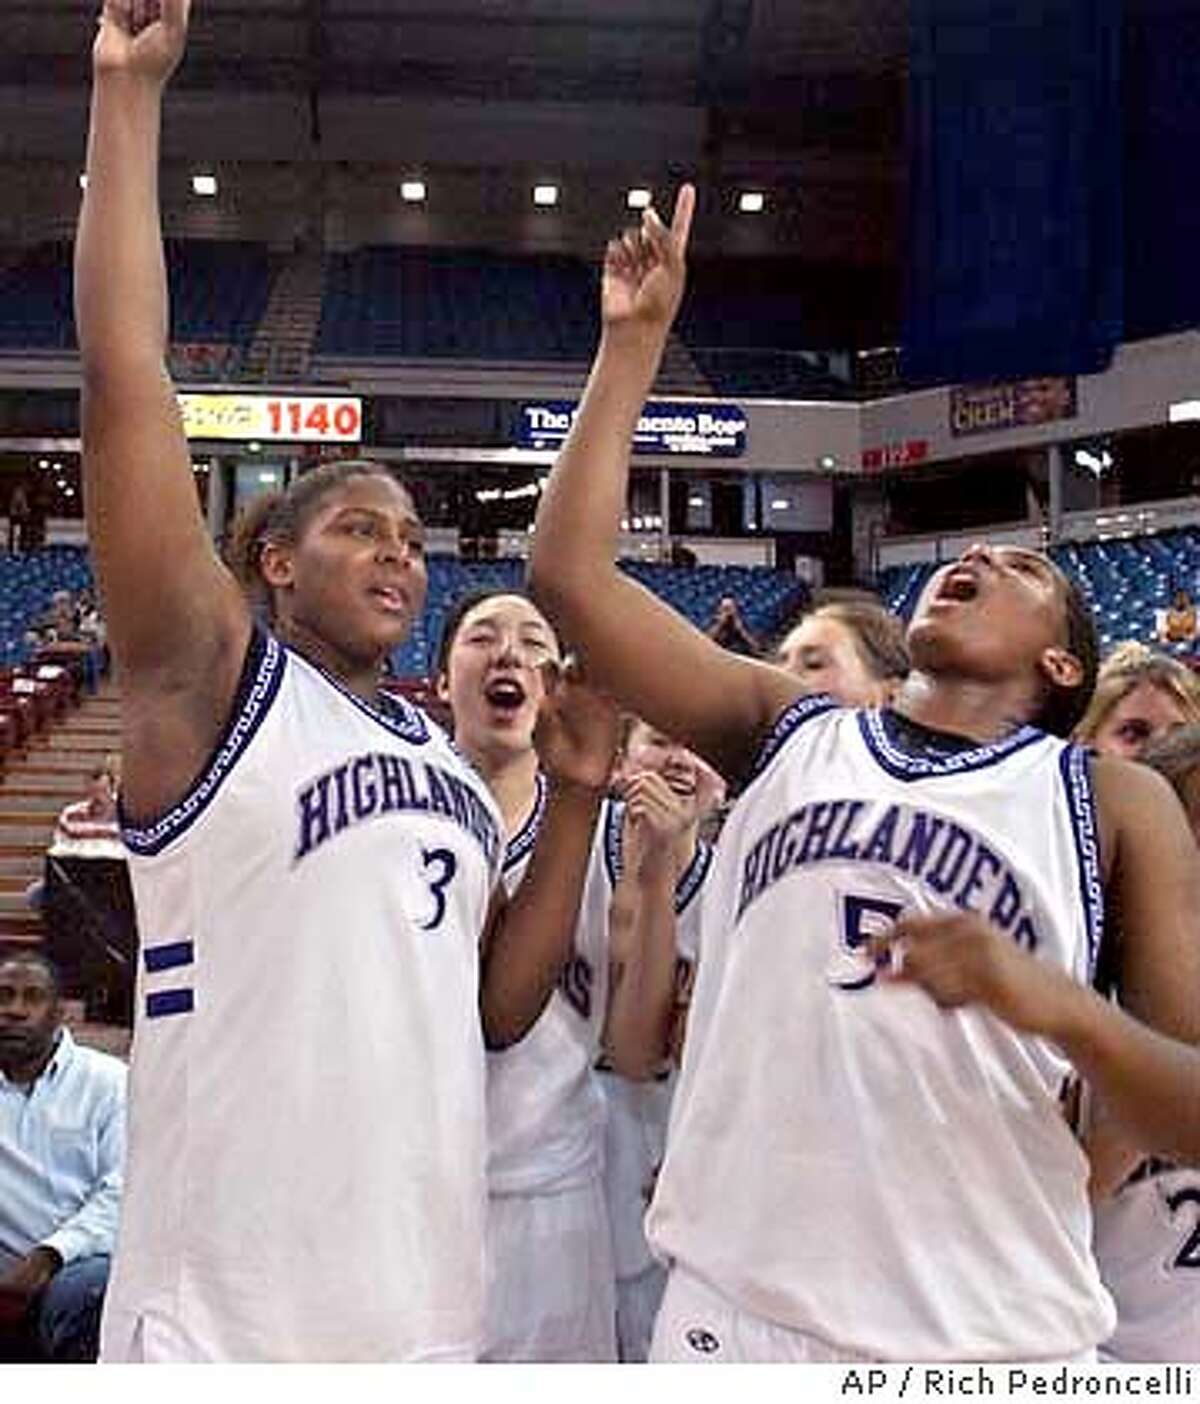 Piedmont's Ashley Paris, right, lets out a shout as she and her sister, Courtney, left, join the team in celebration after Piedmont defeated La Jolla Country Day, 60-51, for the girls' Division IV CIF state championship in Sacramento, Calif., Friday, March 19, 2004. (AP Photo/Rich Pedroncelli)